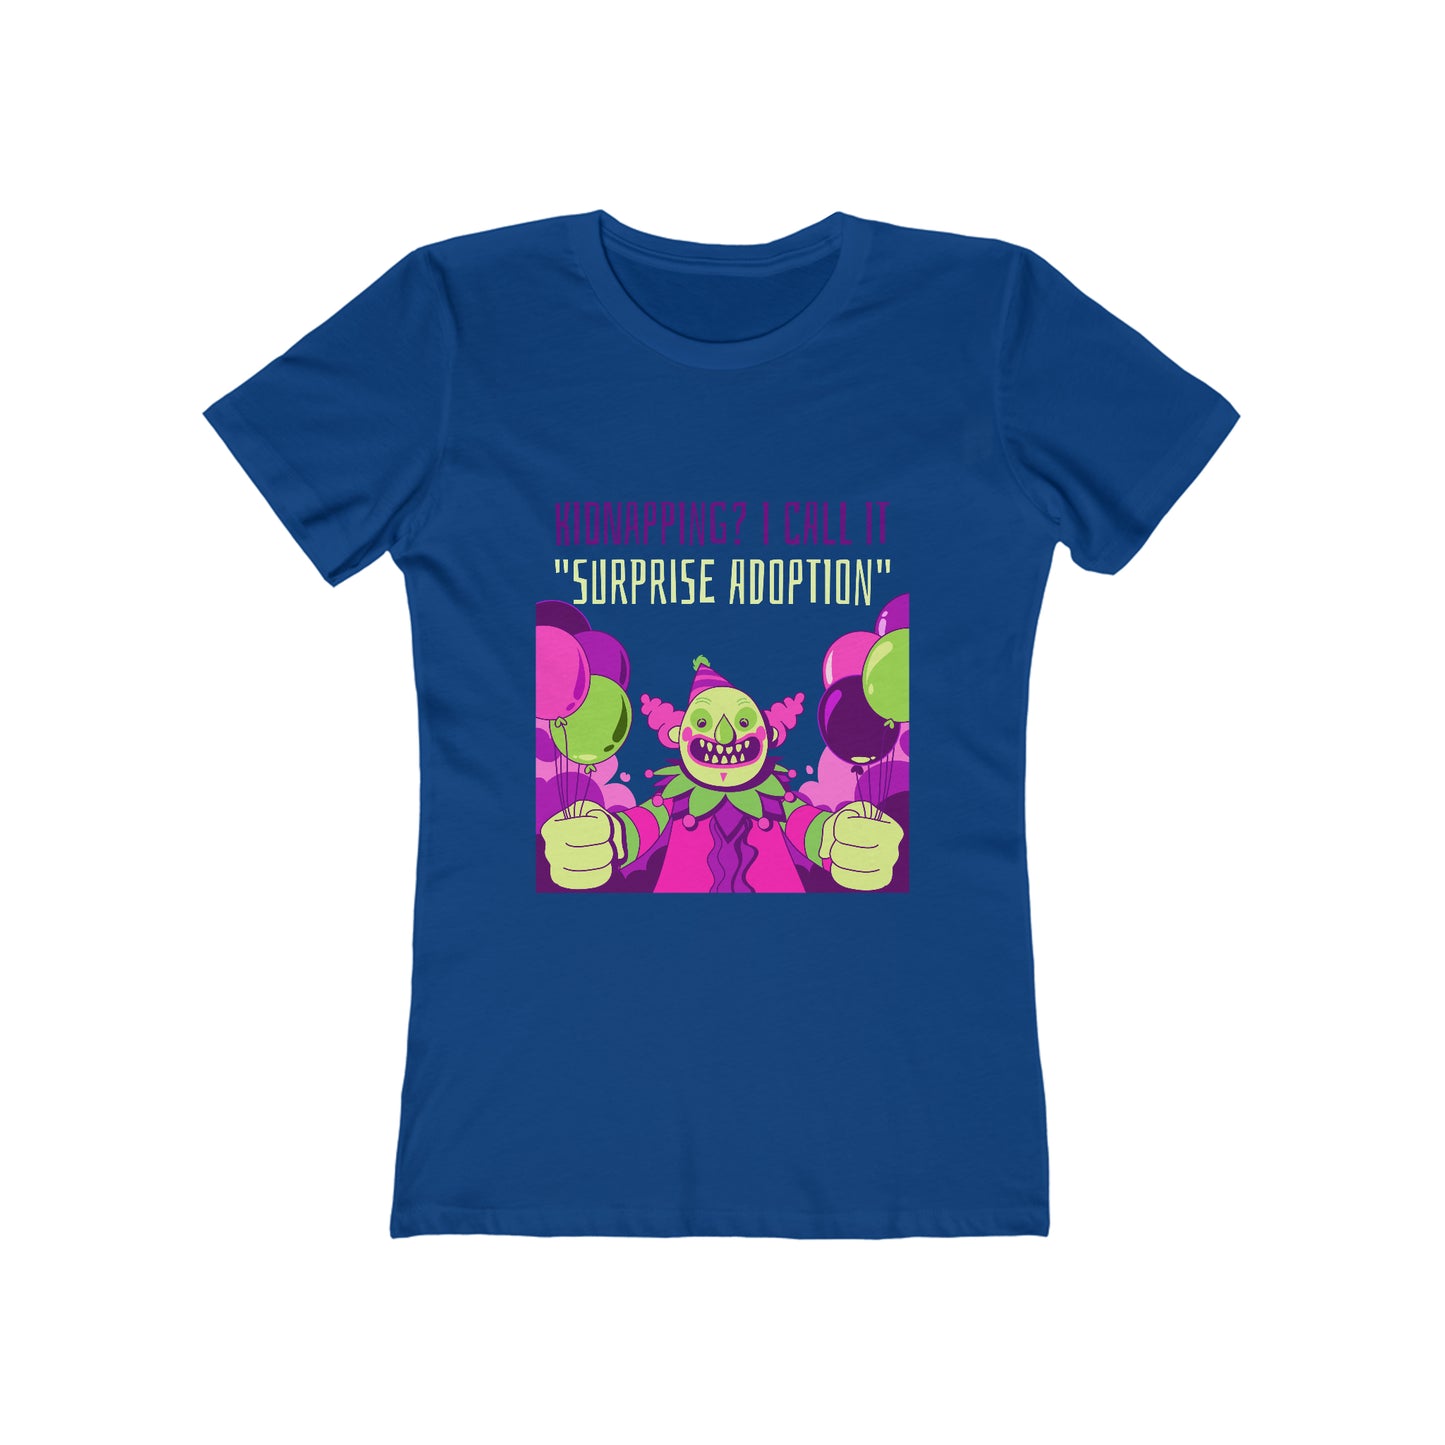 Kidnapping I Call It Surprise Adoption - Women's T-shirt